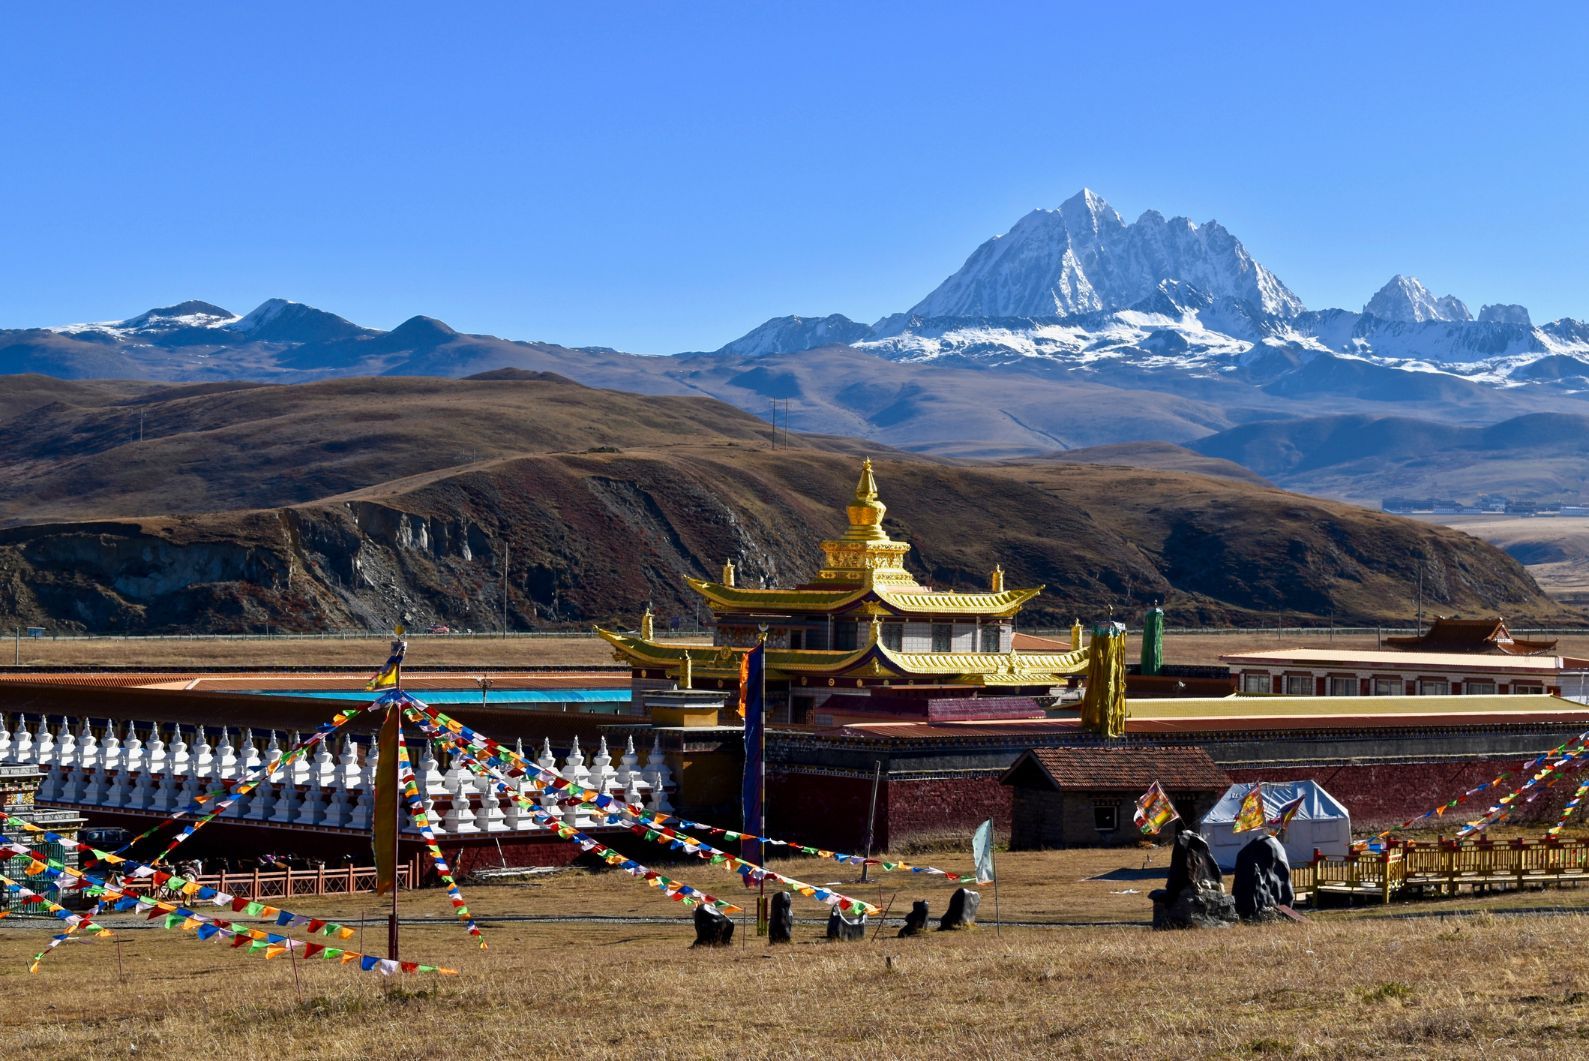 Tagong Temple, with the snowcapped summit of Mount Yala in the background.